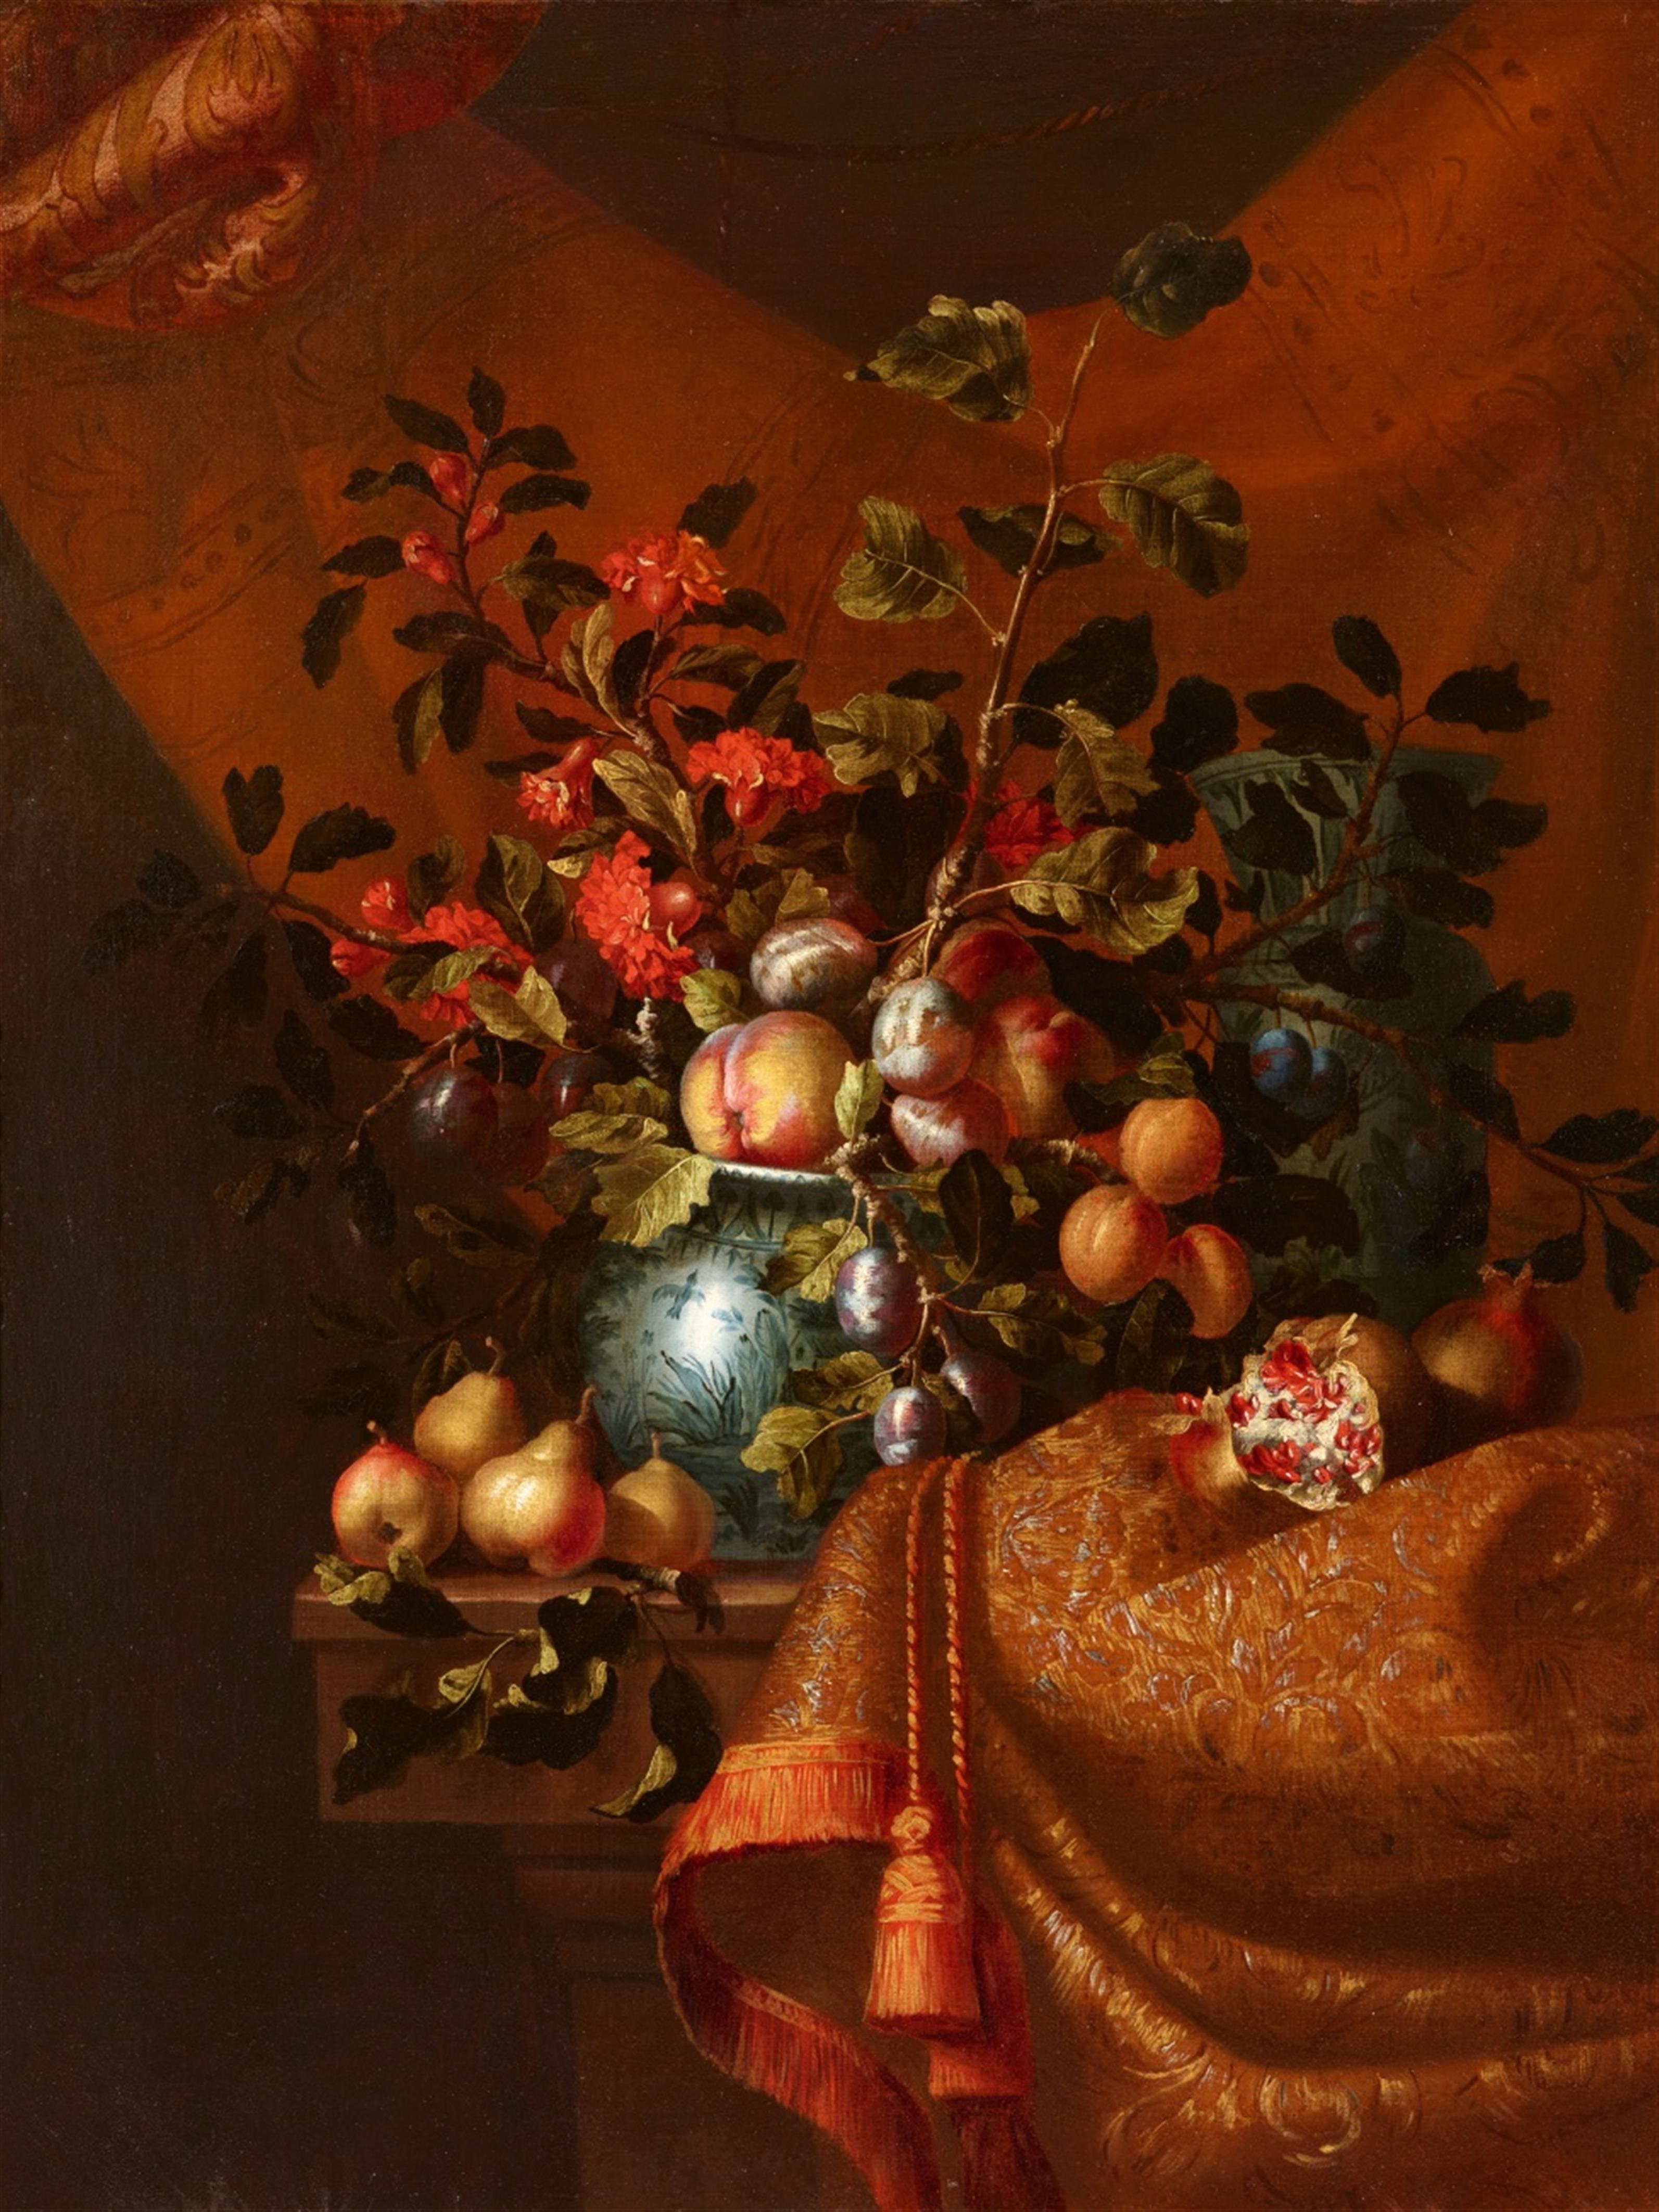 French School circa 1700 - Still Life with Fruit and Flowers in a Porcelain Vase with a Brocade Drapery - image-1